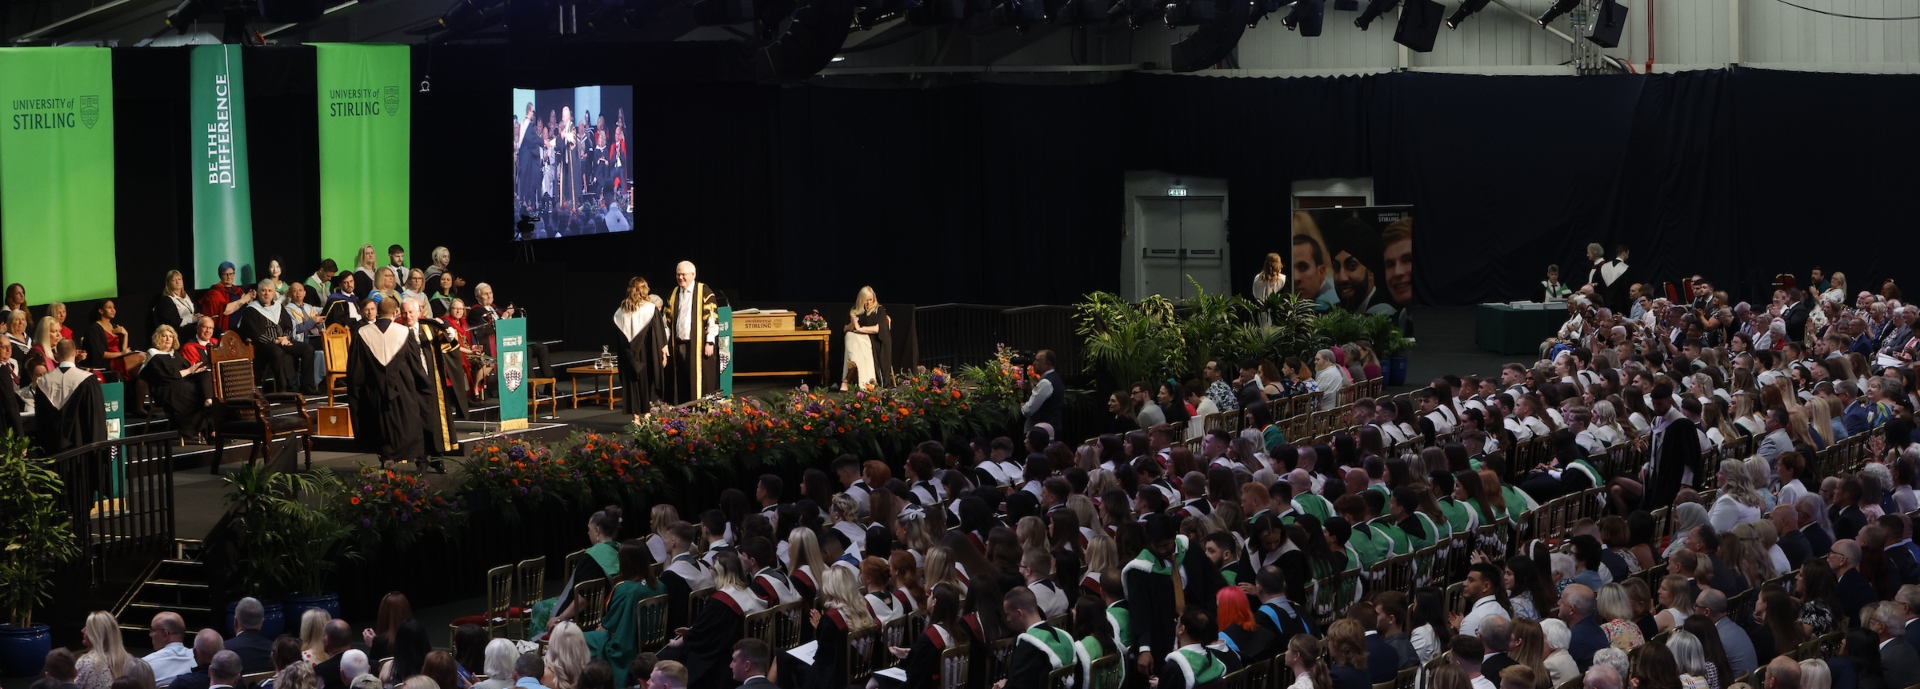 A graduation ceremony in action - a photograph of the graduation hall from above